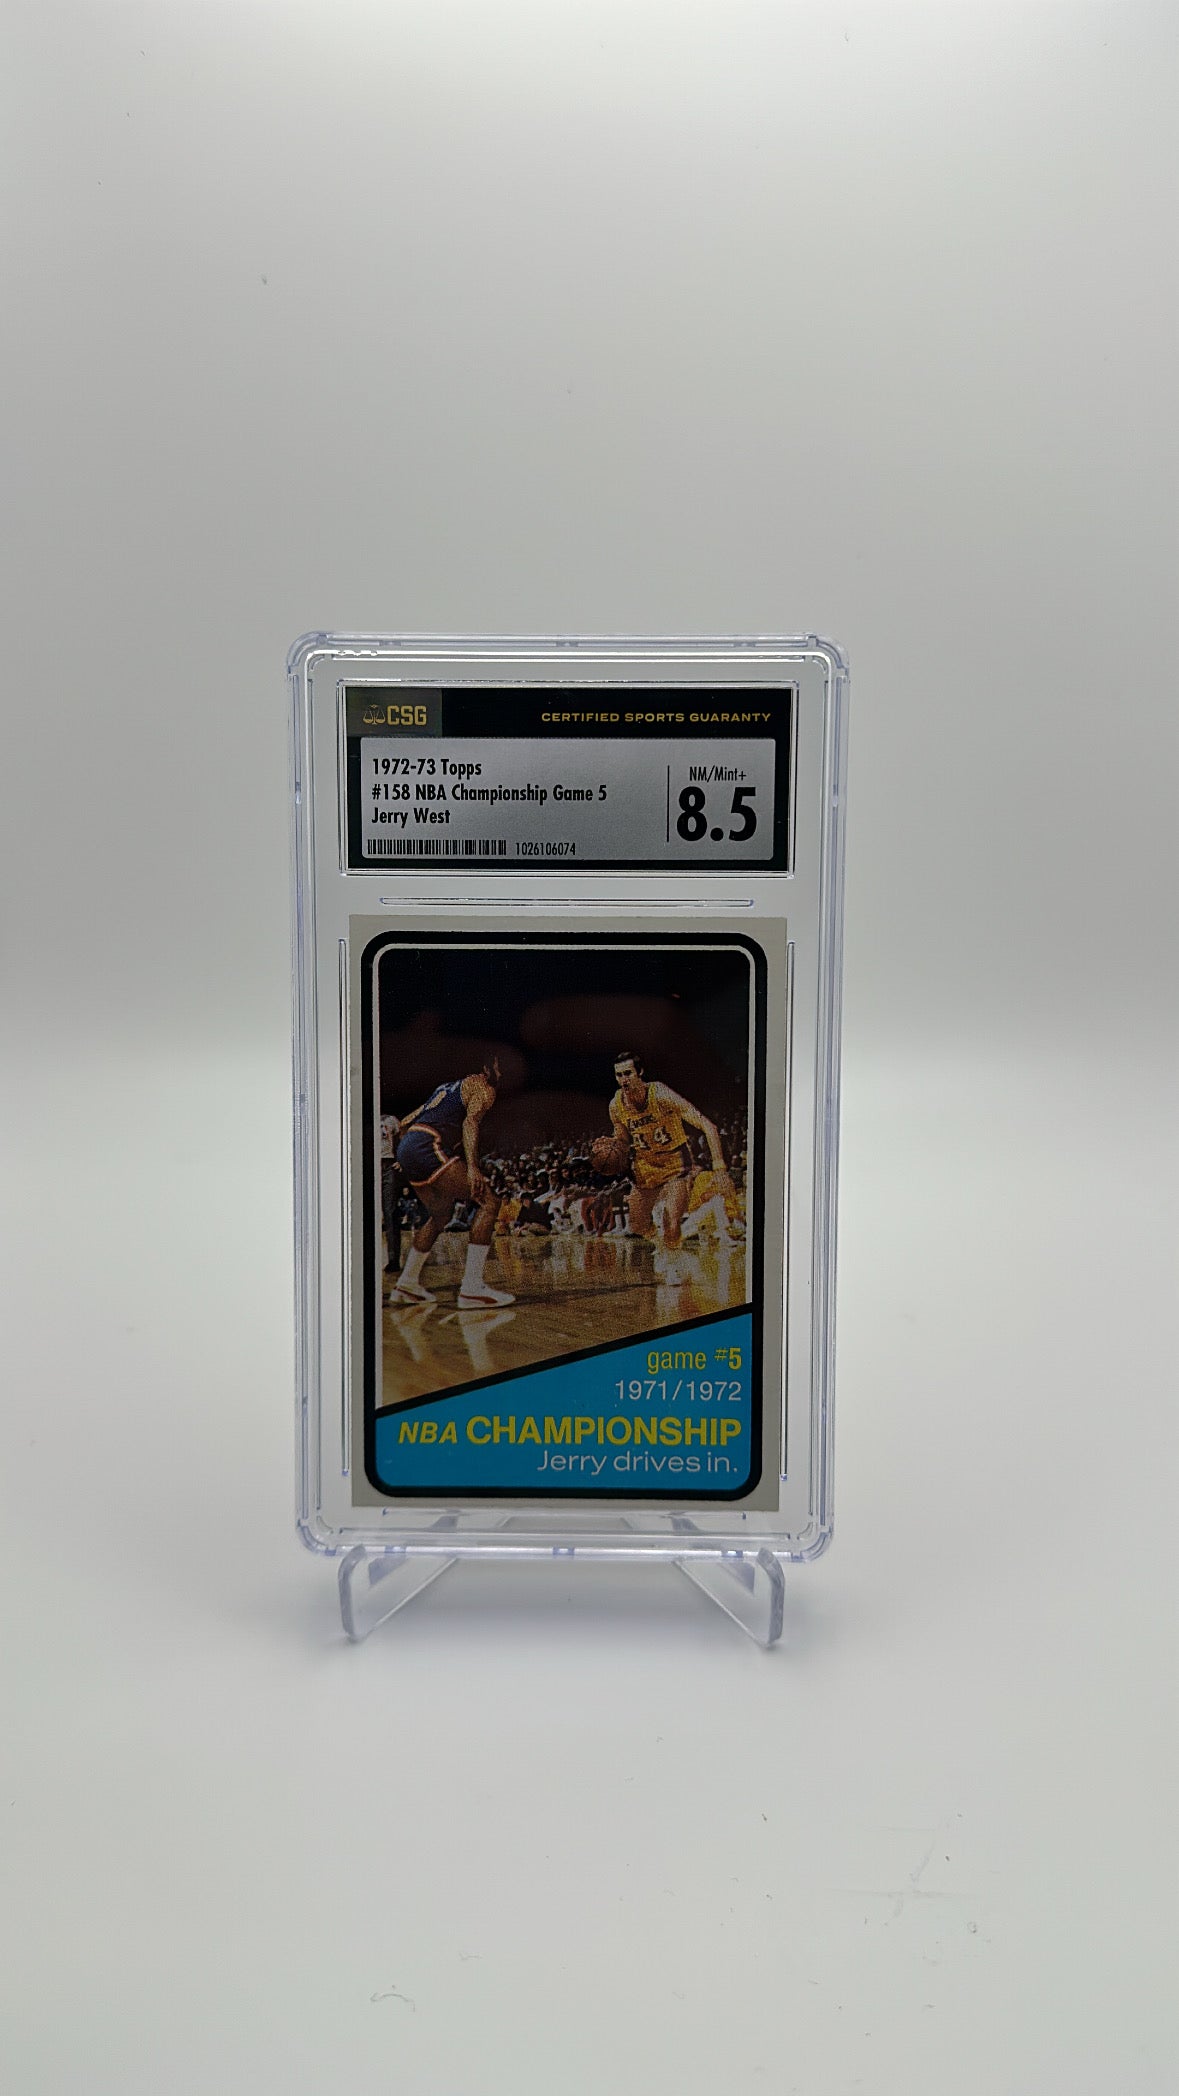 1972-73 Topps - NBA Championship Game 5 Jerry West 158 - CSG CGC 8.5